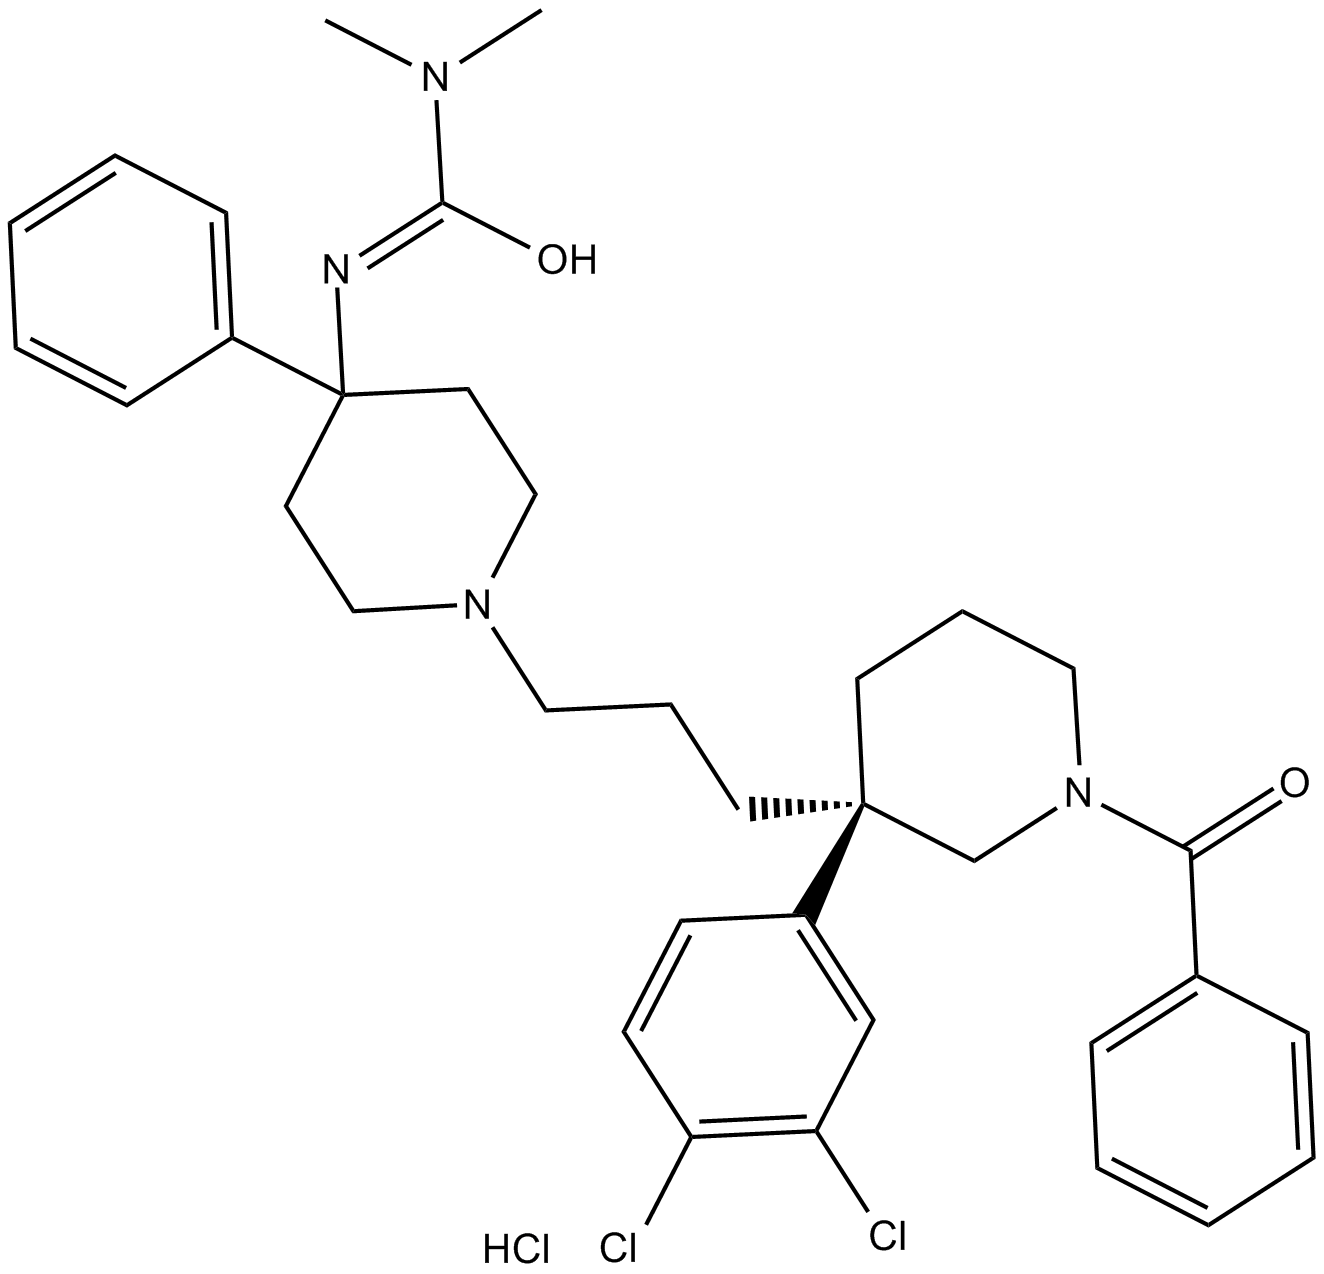 SSR 146977 hydrochloride  Chemical Structure